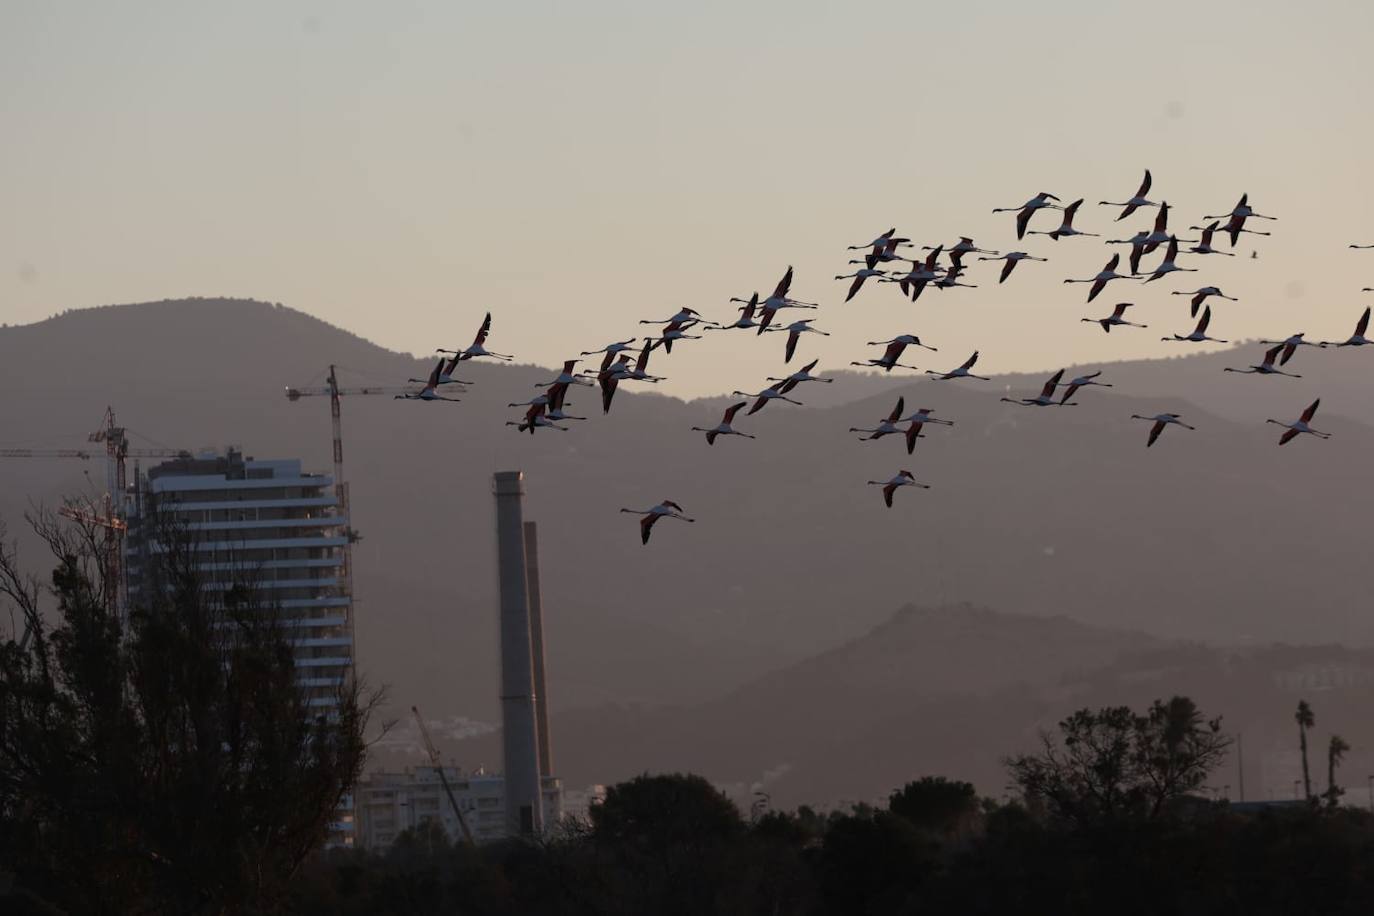 Picture special: flamingos arrive at mouth of river in middle of Malaga city